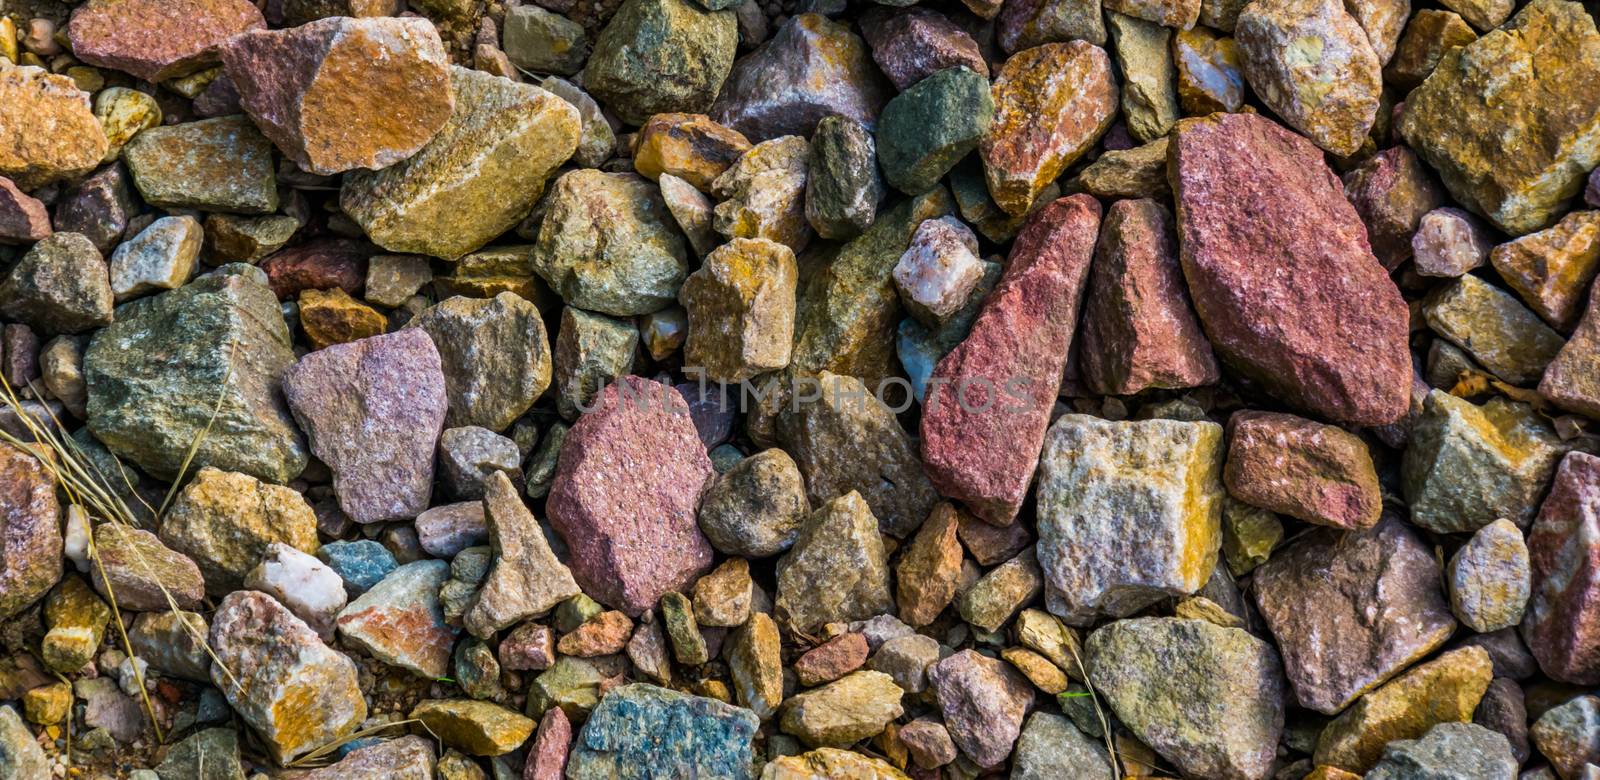 gravel stones in diverse colors in closeup, stone pattern background by charlottebleijenberg